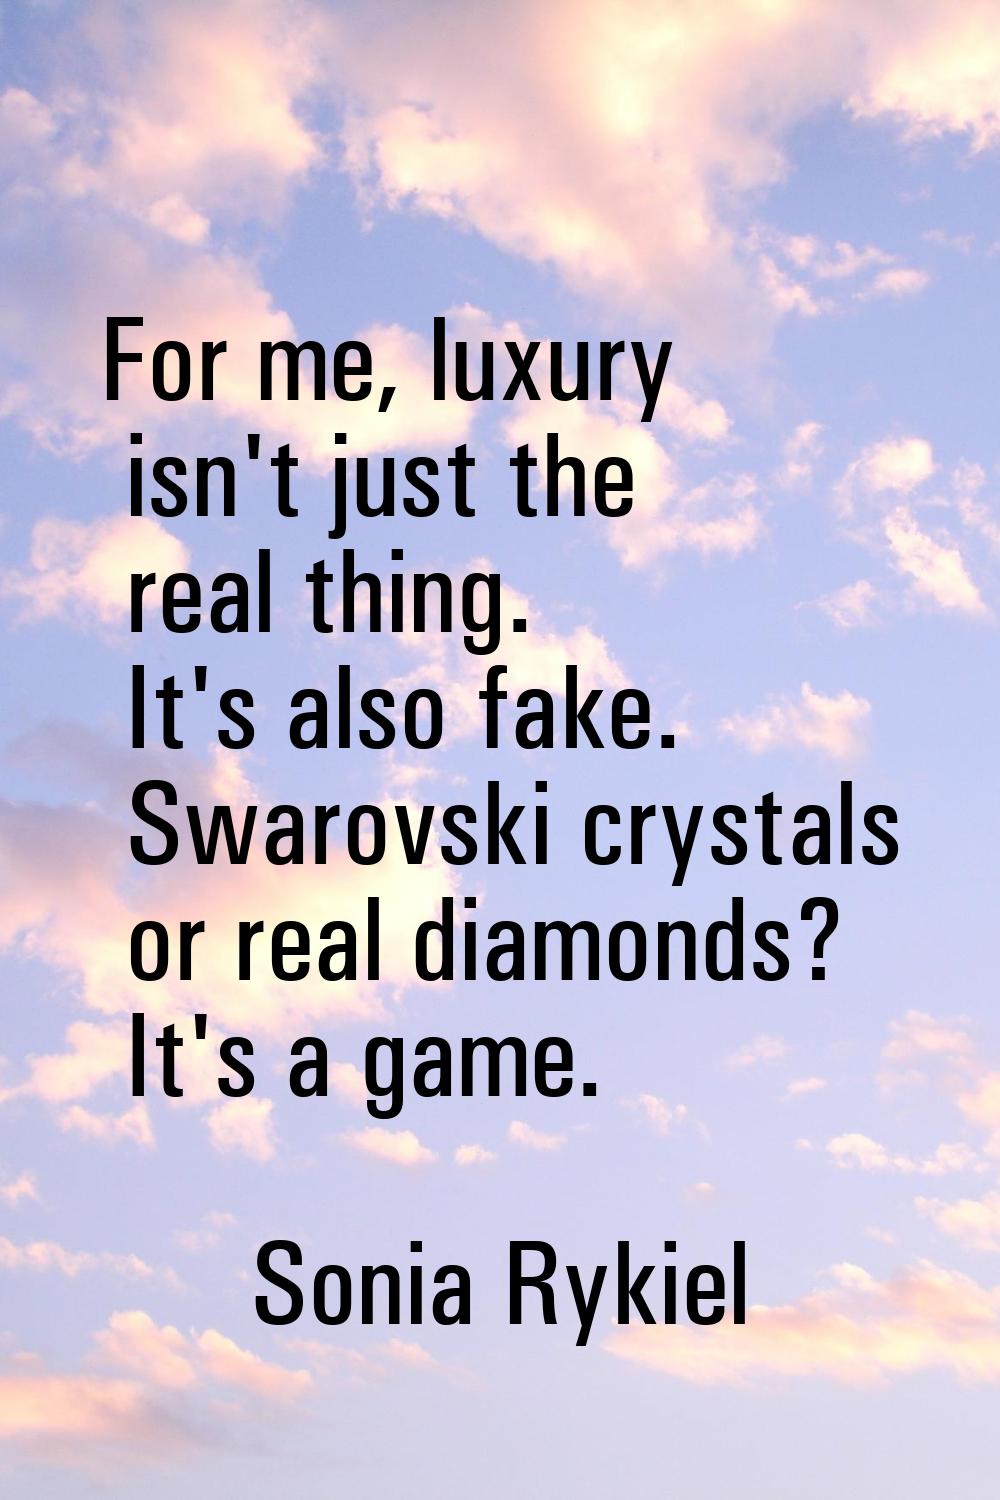 For me, luxury isn't just the real thing. It's also fake. Swarovski crystals or real diamonds? It's